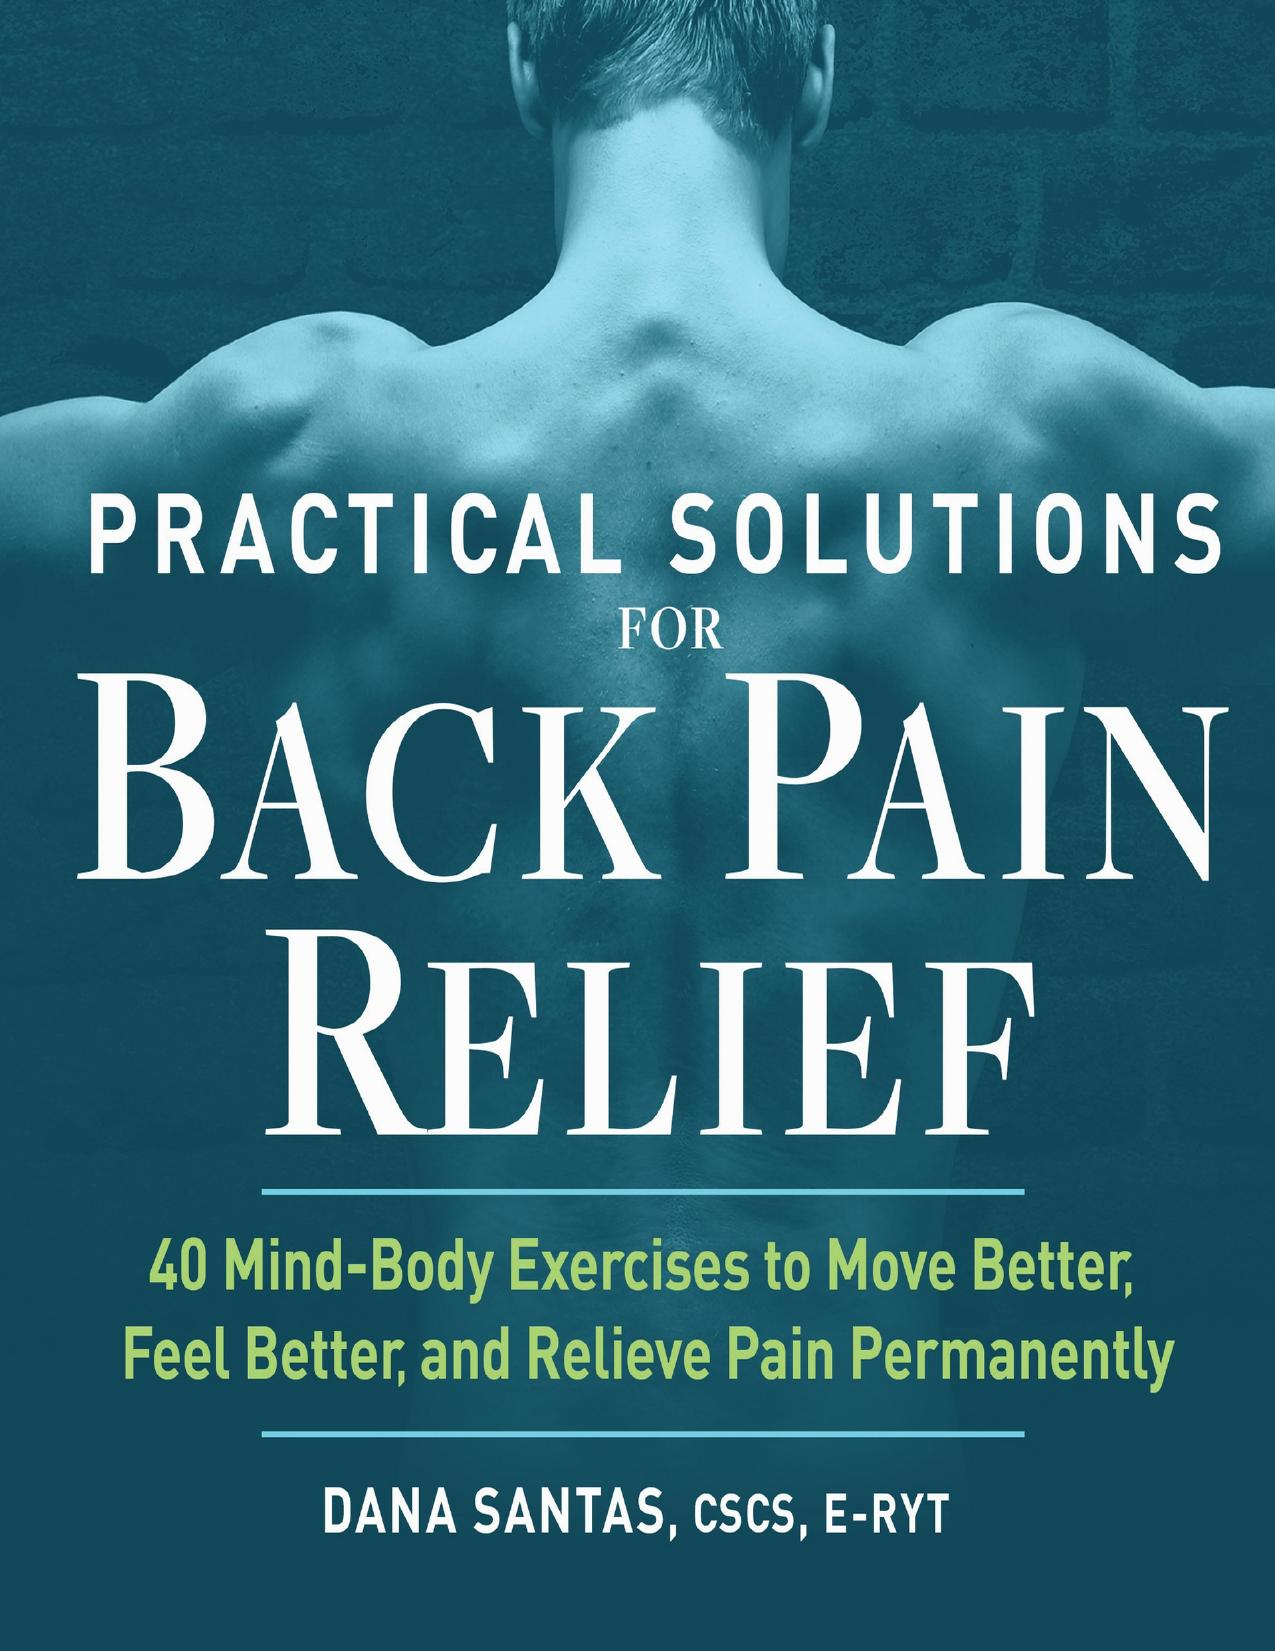 Practical Solutions for Back Pain Relief: 40 Mind-Body Exercises to Move Better, Feel Better, and Relieve Pain Permanently by Santas CSCS E-RYT Dana